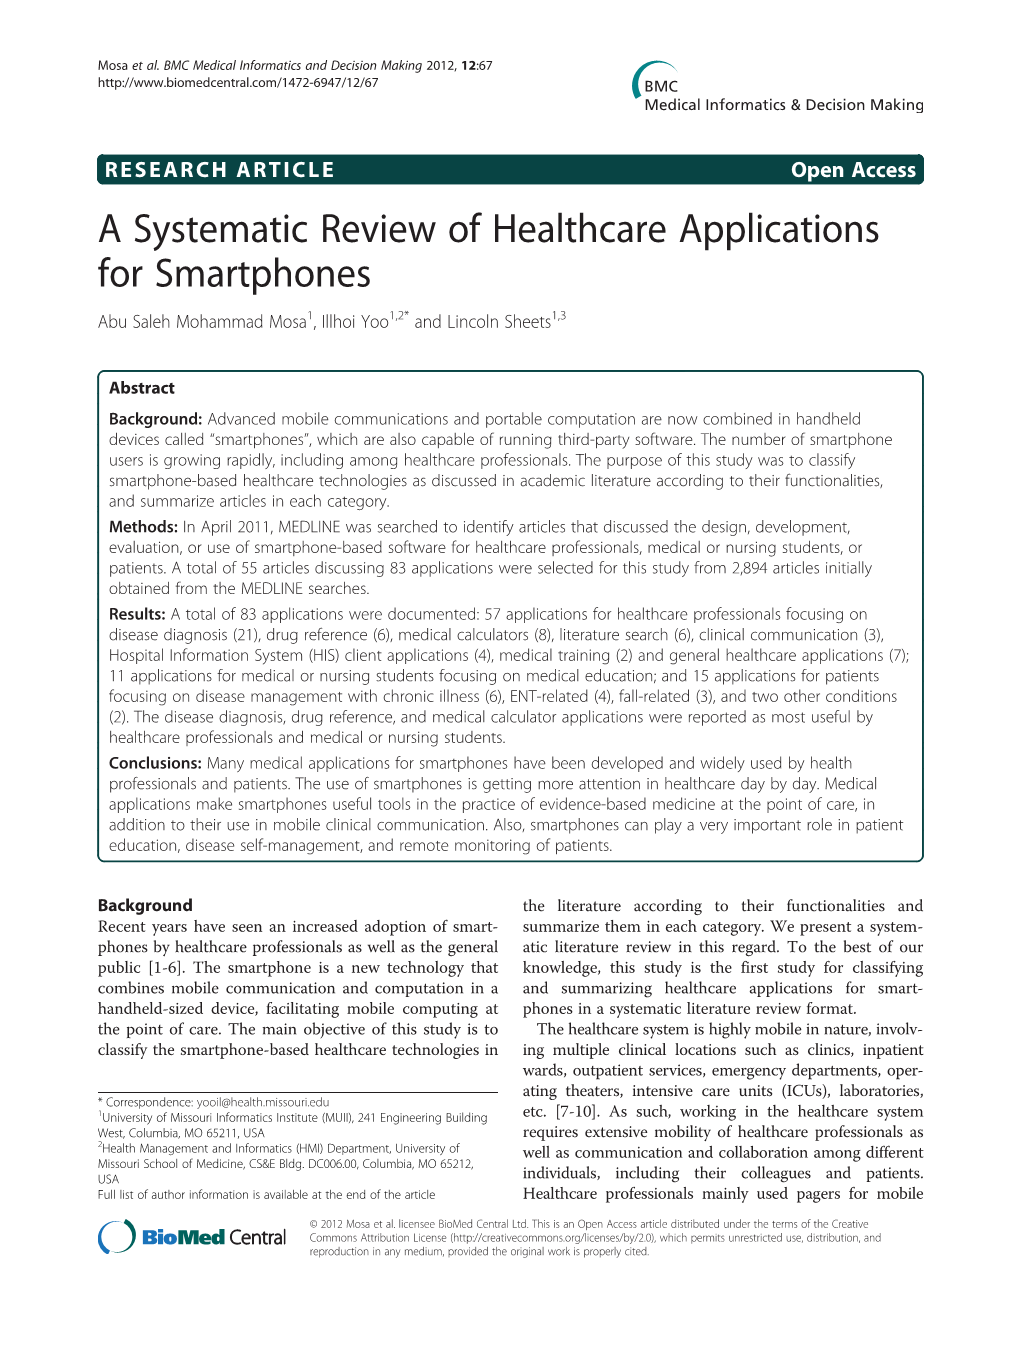 A Systematic Review of Healthcare Applications for Smartphones Abu Saleh Mohammad Mosa1, Illhoi Yoo1,2* and Lincoln Sheets1,3